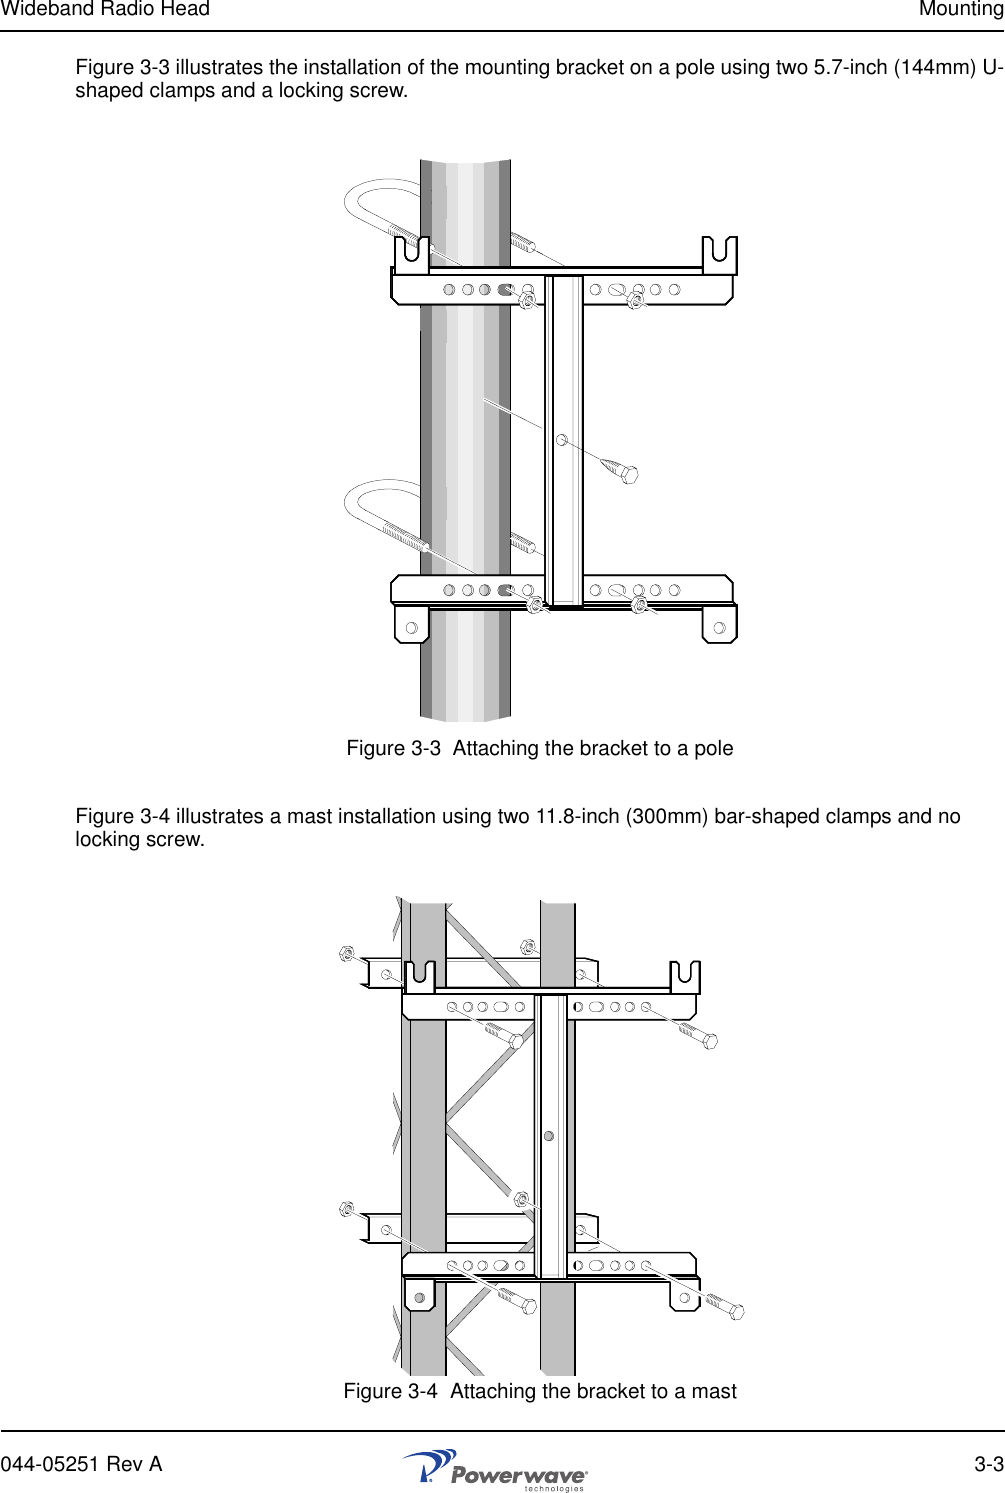 Wideband Radio Head Mounting044-05251 Rev A 3-3Figure 3-3 illustrates the installation of the mounting bracket on a pole using two 5.7-inch (144mm) U-shaped clamps and a locking screw.Figure 3-3  Attaching the bracket to a poleFigure 3-4 illustrates a mast installation using two 11.8-inch (300mm) bar-shaped clamps and no locking screw.Figure 3-4  Attaching the bracket to a mast